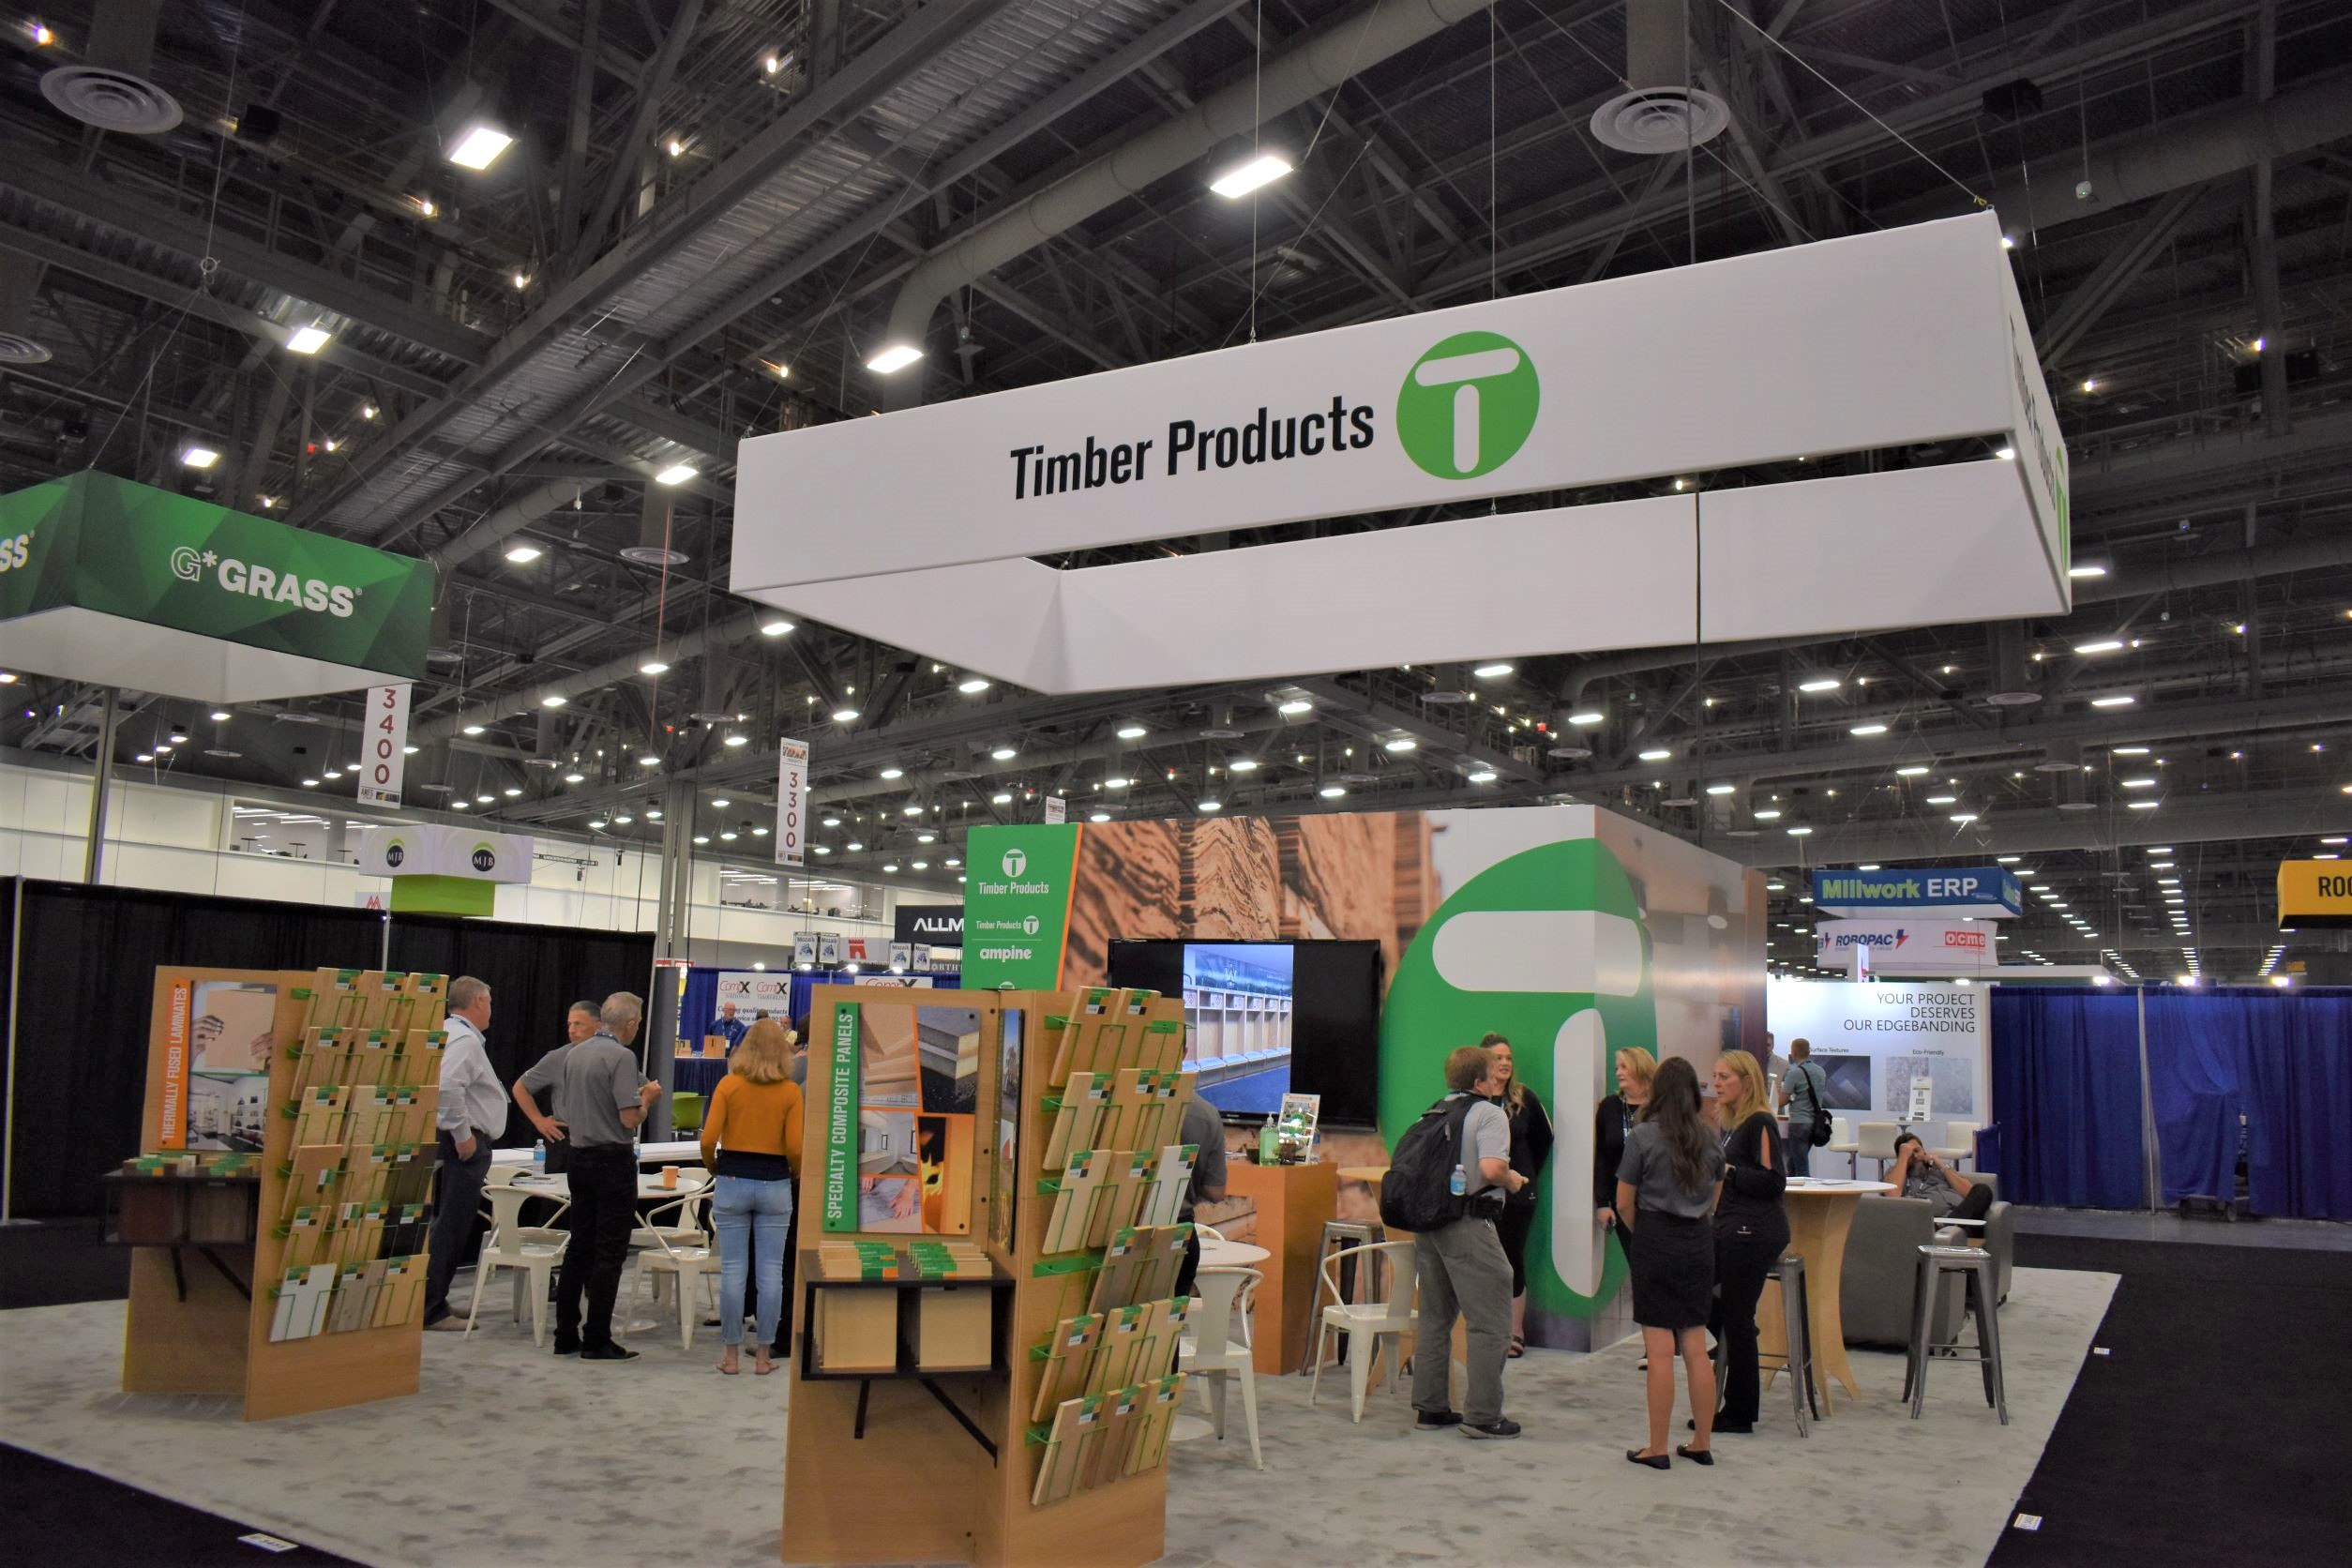 Timber Products tradeshow booth at AWFS